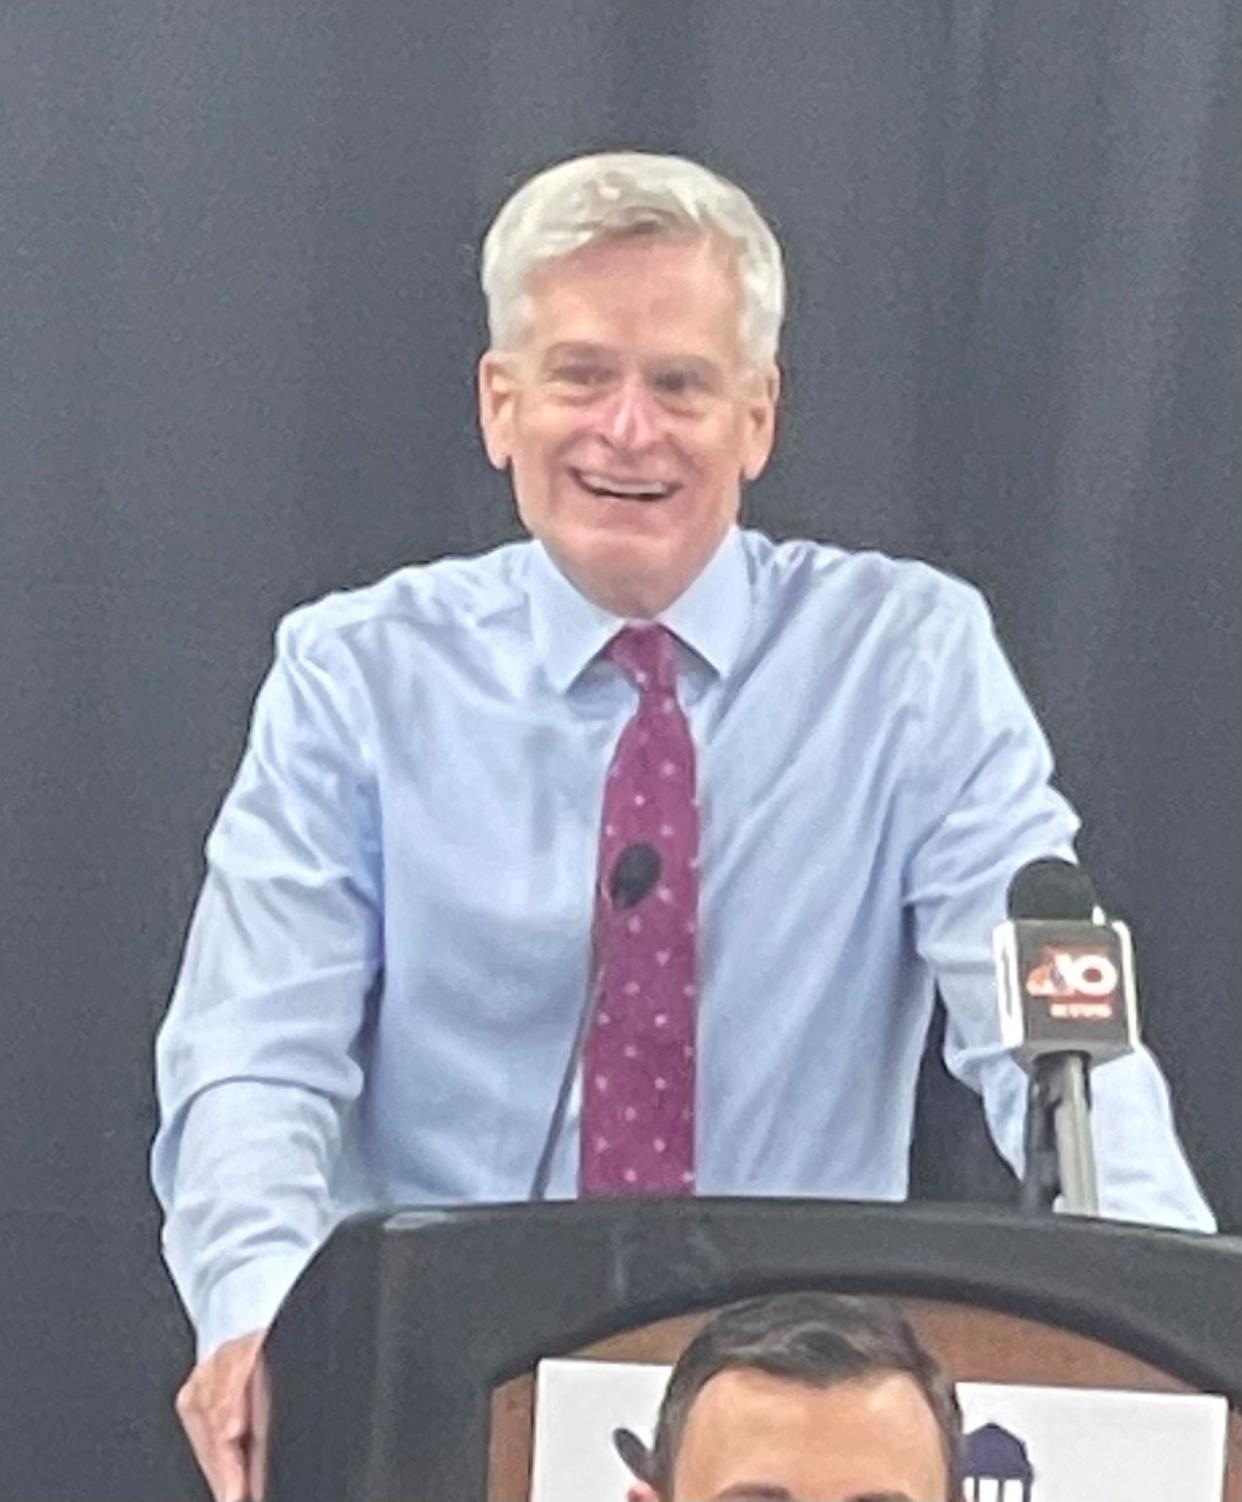 Sen. Bill Cassidy (R-Baton Rouge) served as the keynote speaker at a Monroe Chamber of Commerce breakfast on Wednesday.